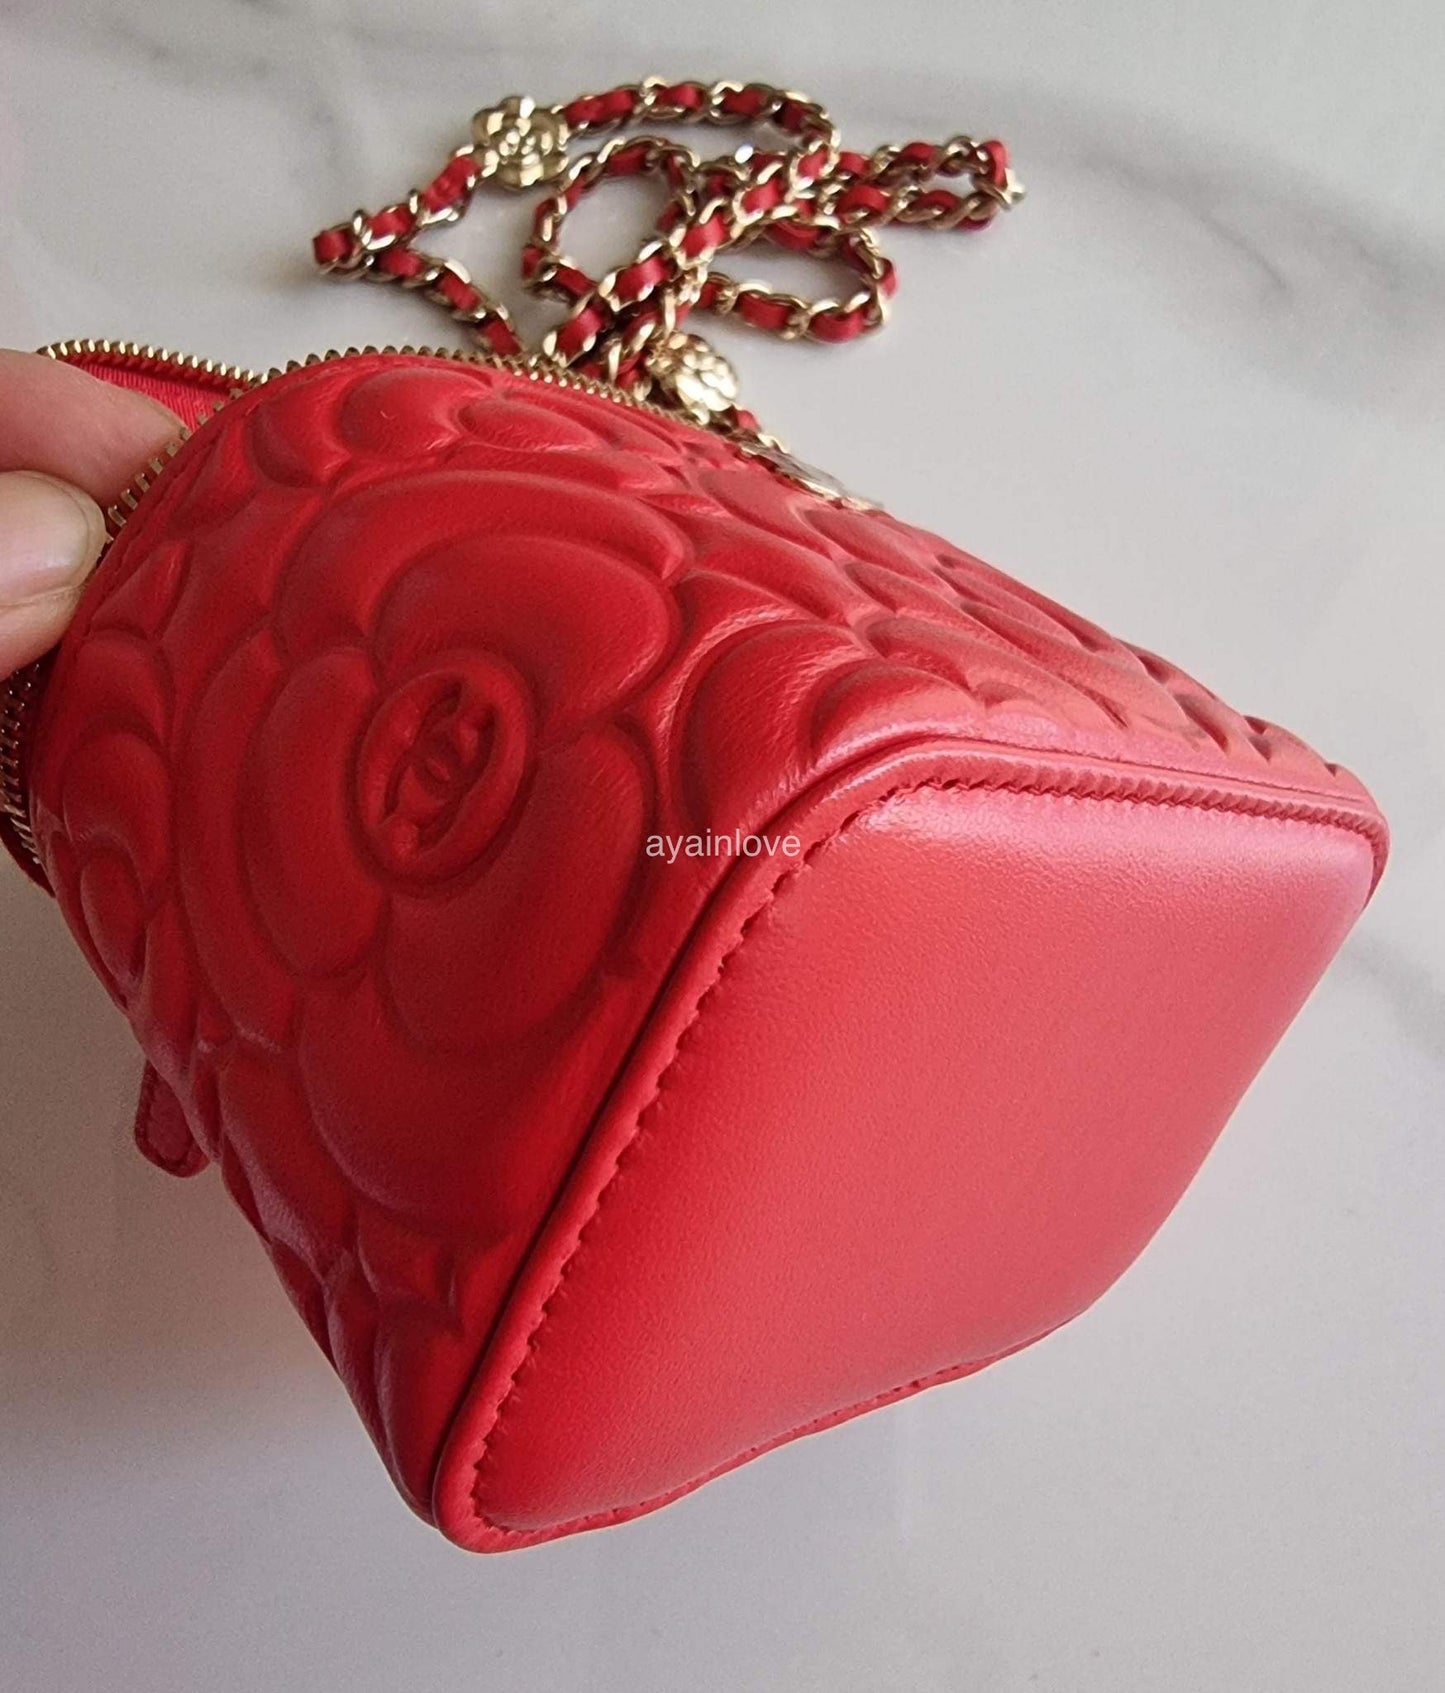 CHANEL 21S Red Lamb Skin Camellia Square Vanity On Chain Light Gold Hardware